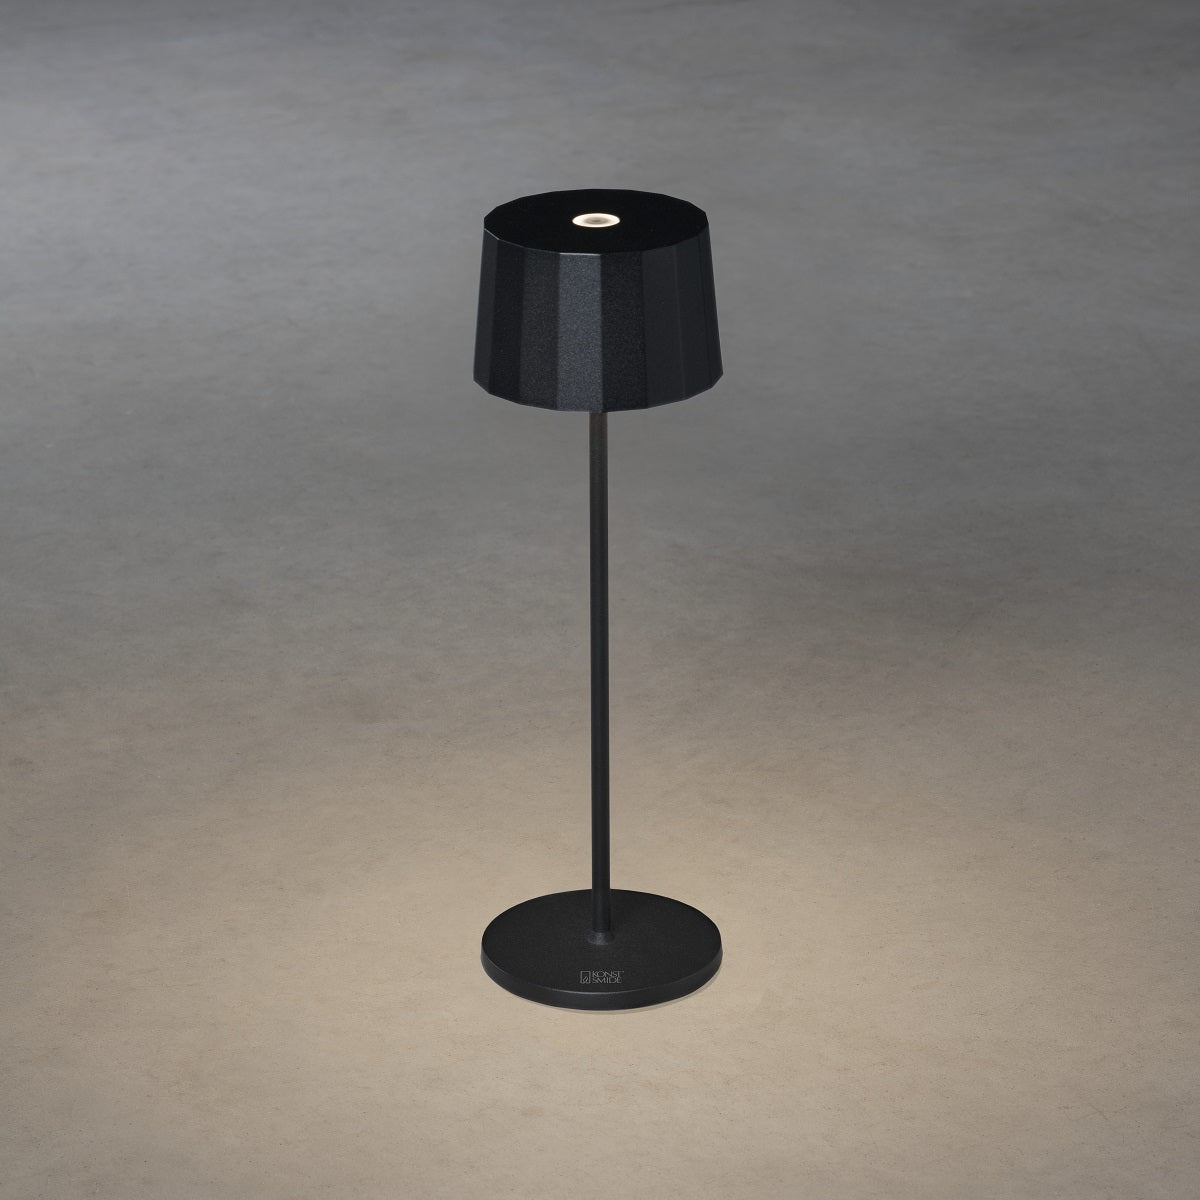 Positano Black Table Lamp Usb Dimmable